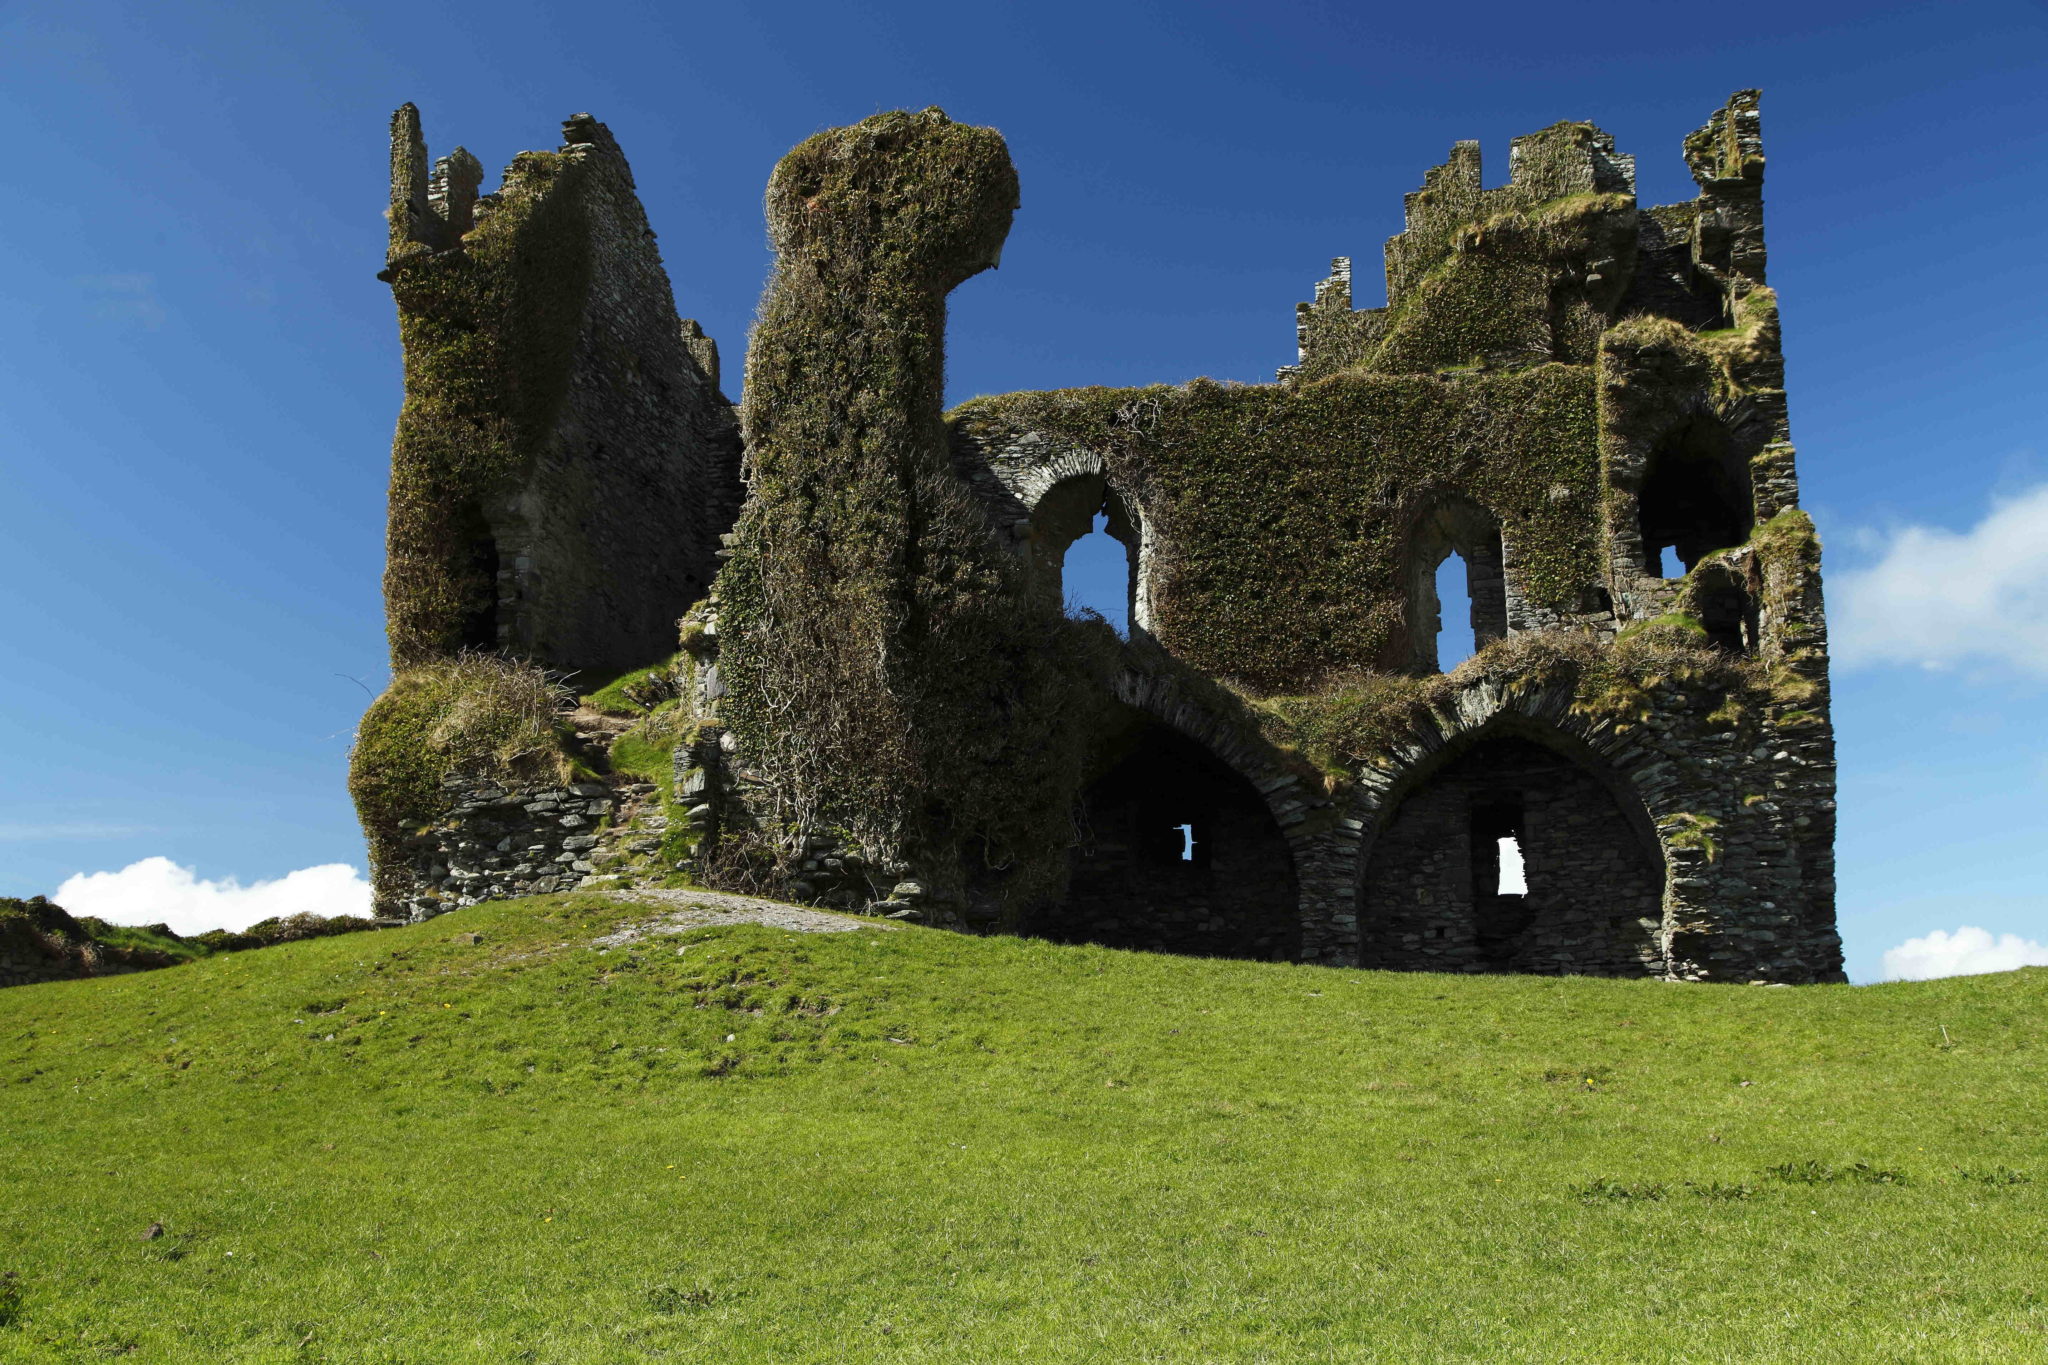 The ruins of Ballycarbery Castle on the Wild Atlantic Way near Cahirciveen in County Kerry